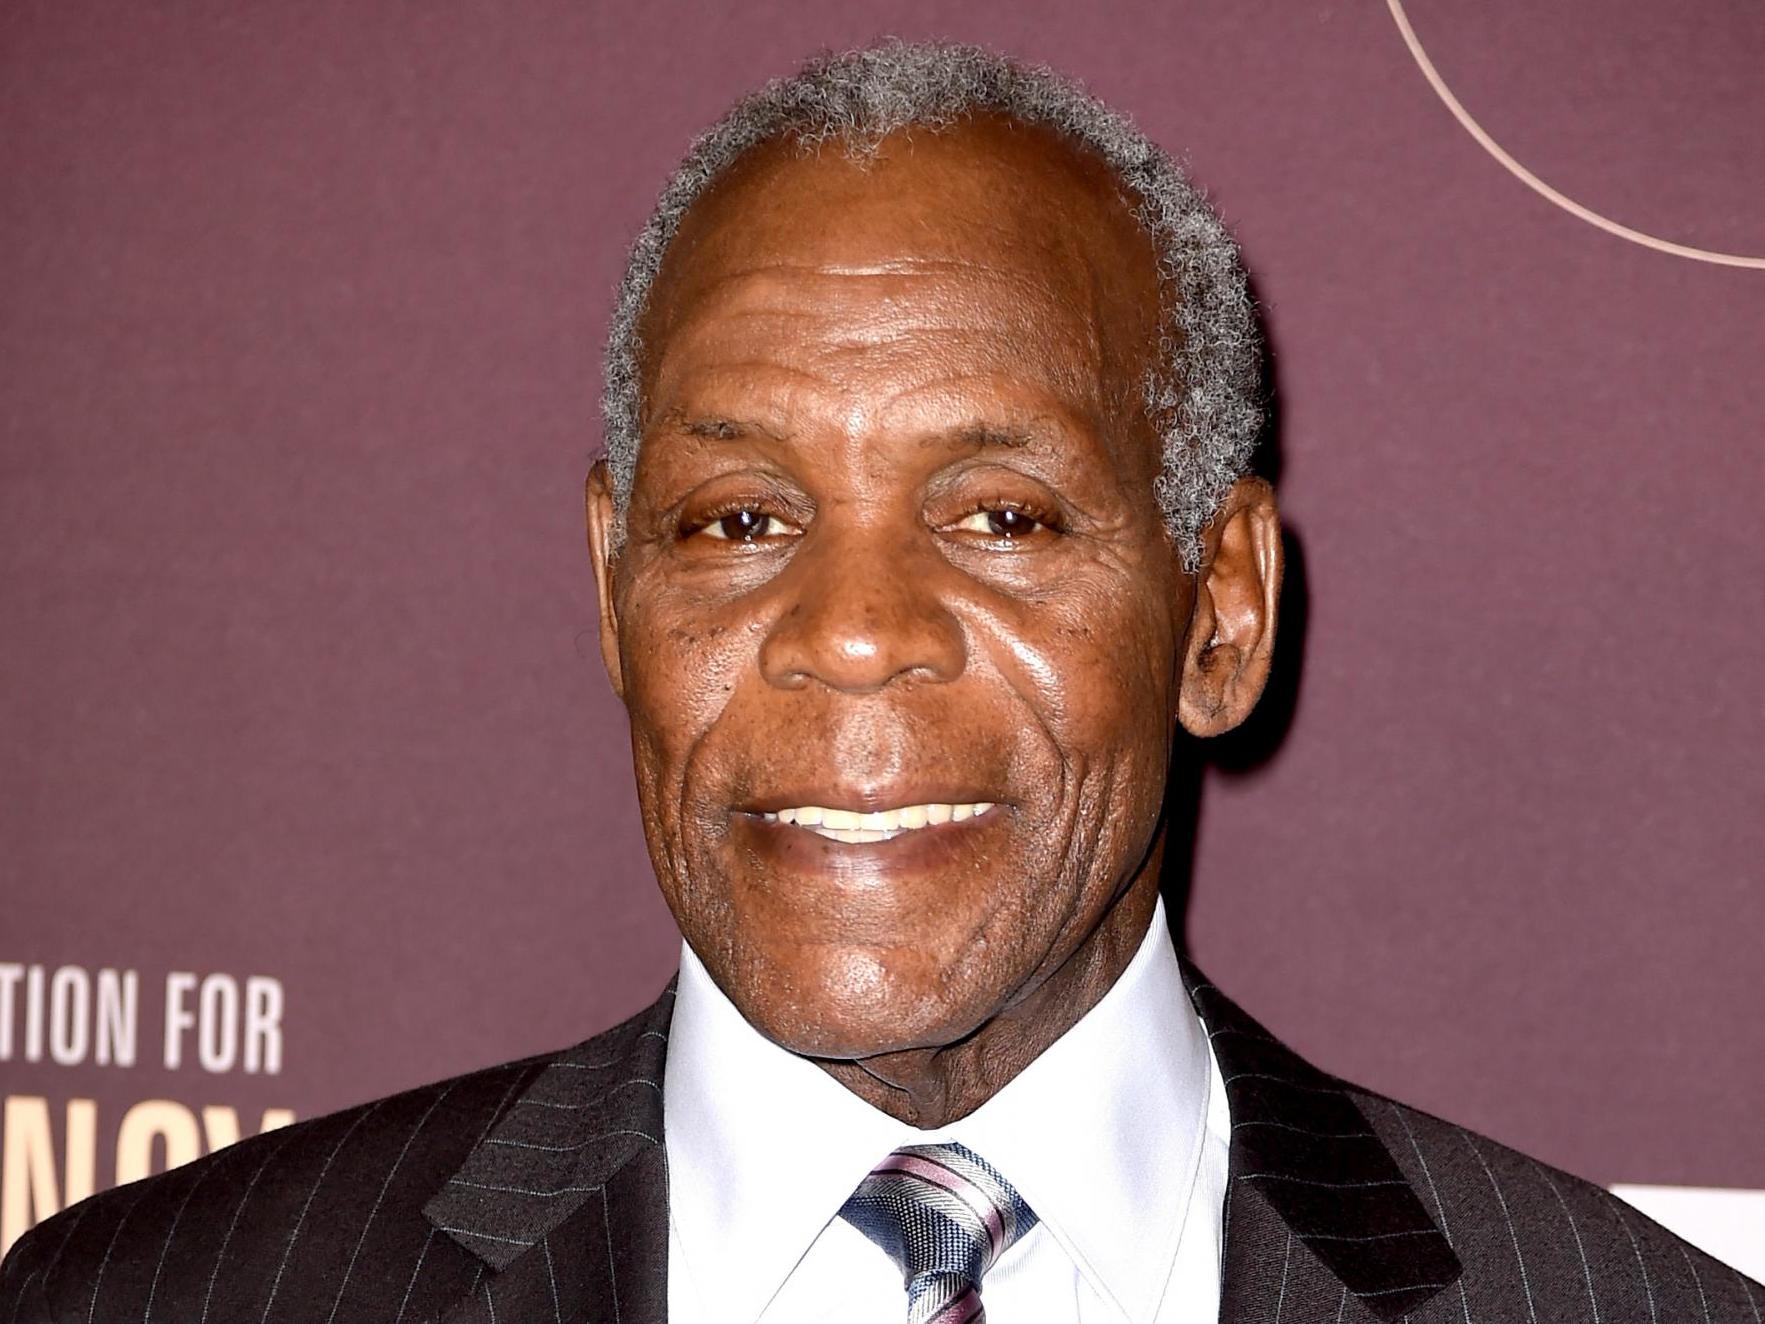 Danny Glover From Lethal Weapon Had 1st Seizure at 15 And Epilepsy In Teenage Years!